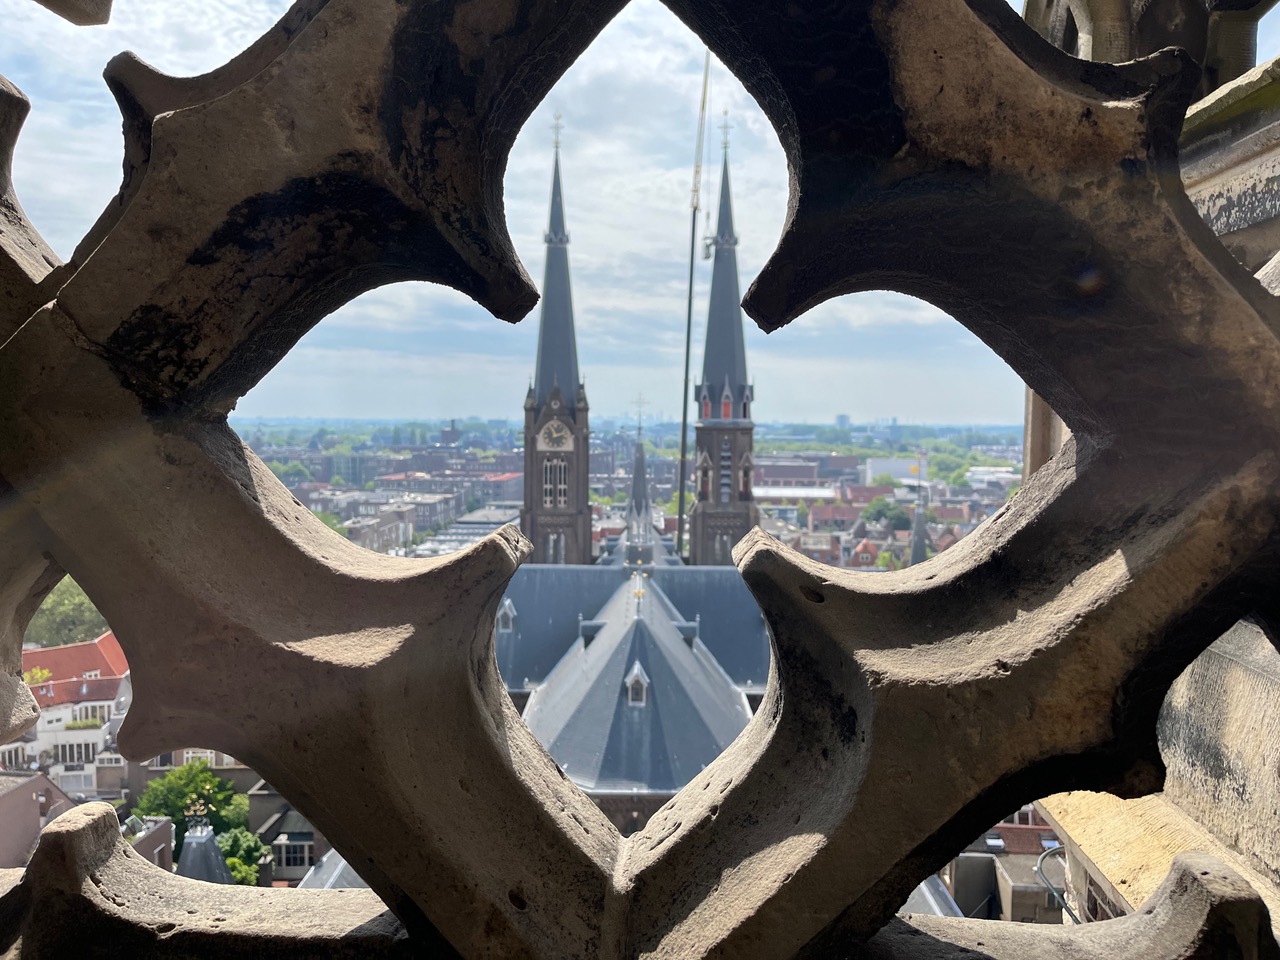 twin church towers through the decorative railing of the New Church of Delft tower